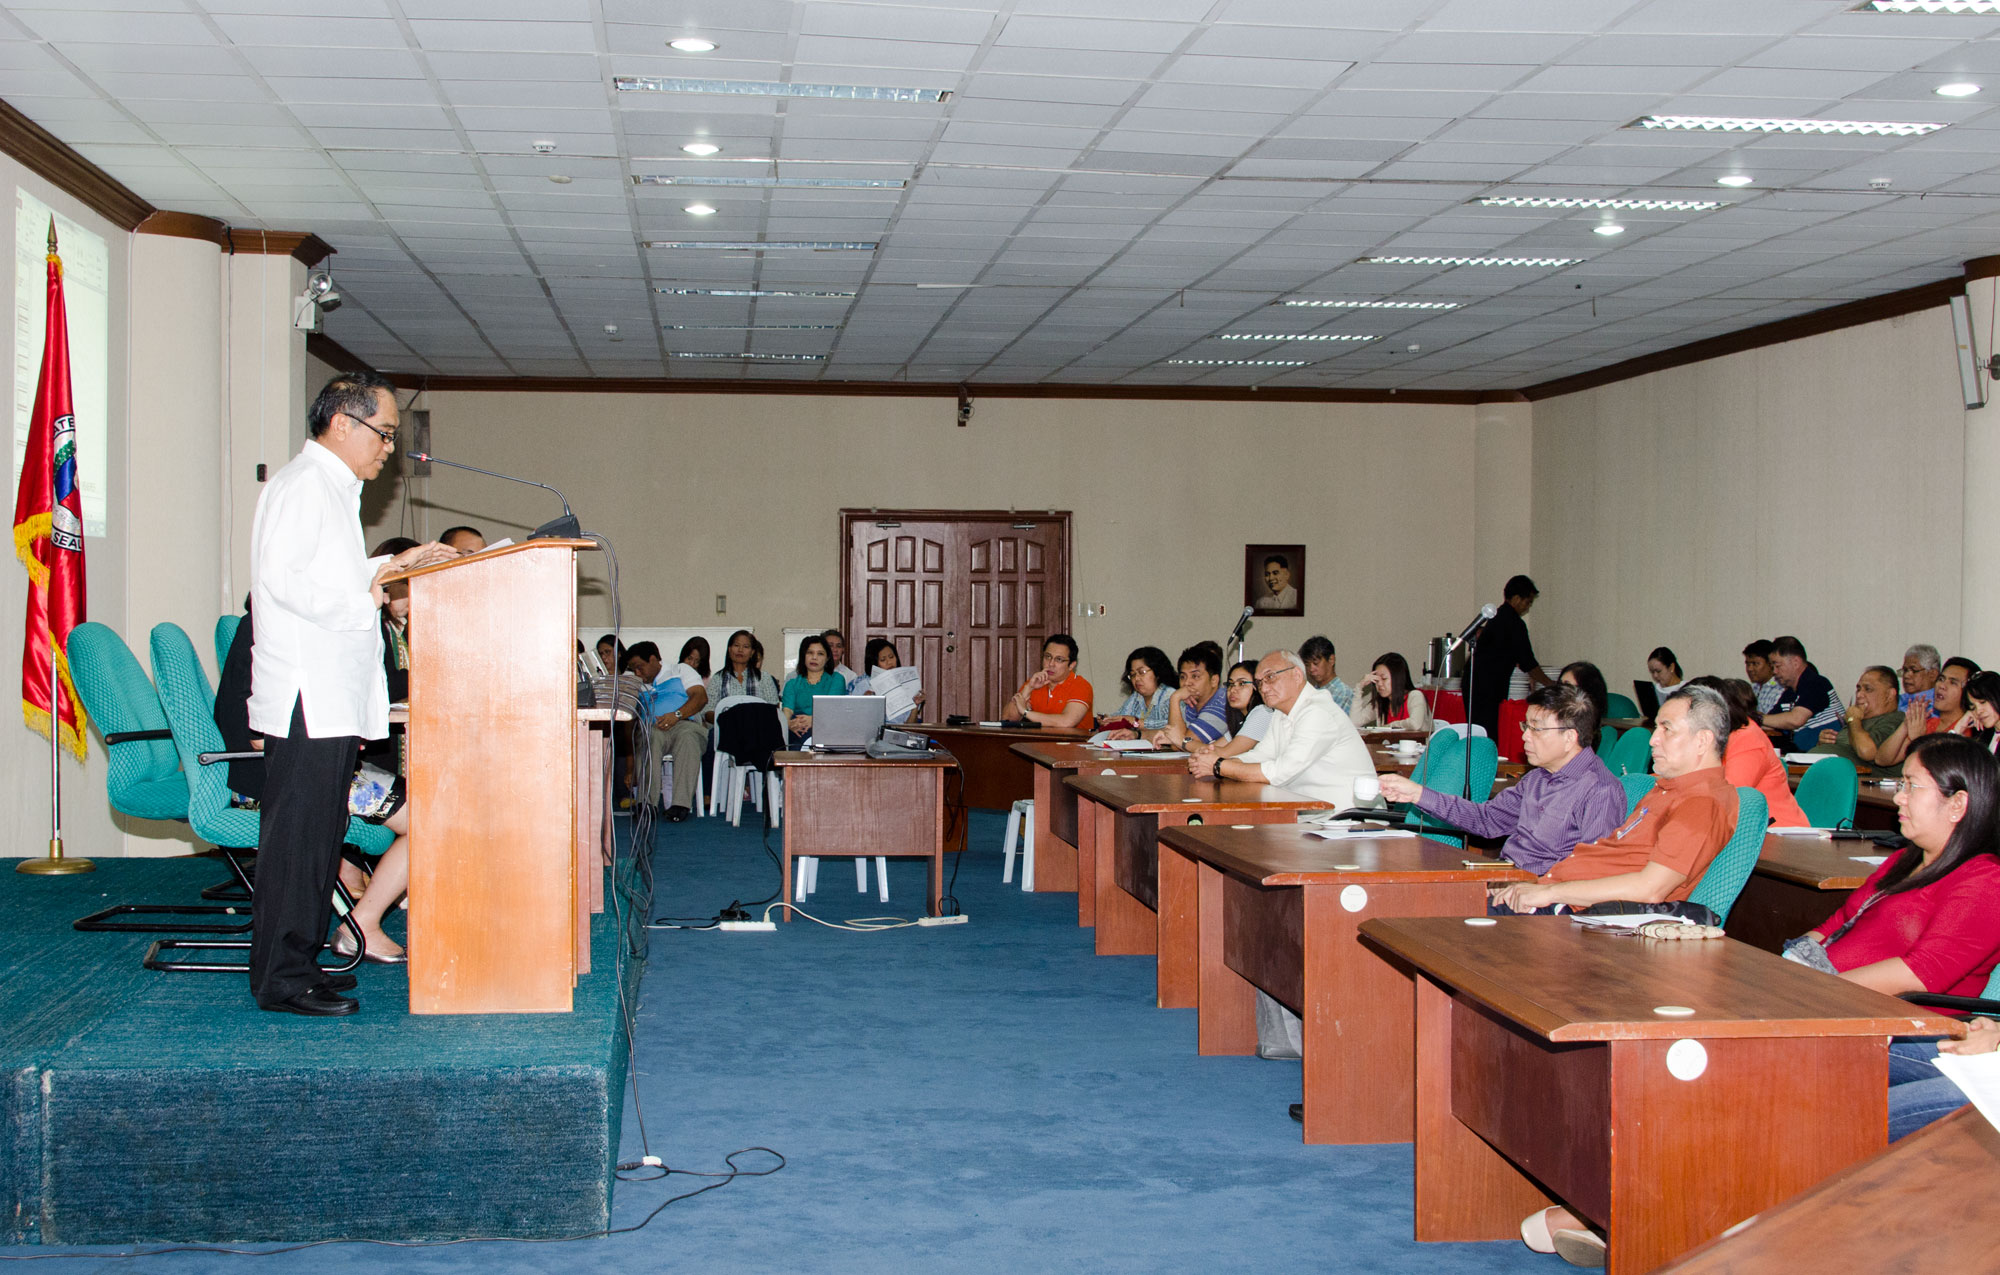 Senate Centennial Lecture Series “Assessment of the Bottom-up Budgeting Process for FY 2015-ggm_7865.jpg